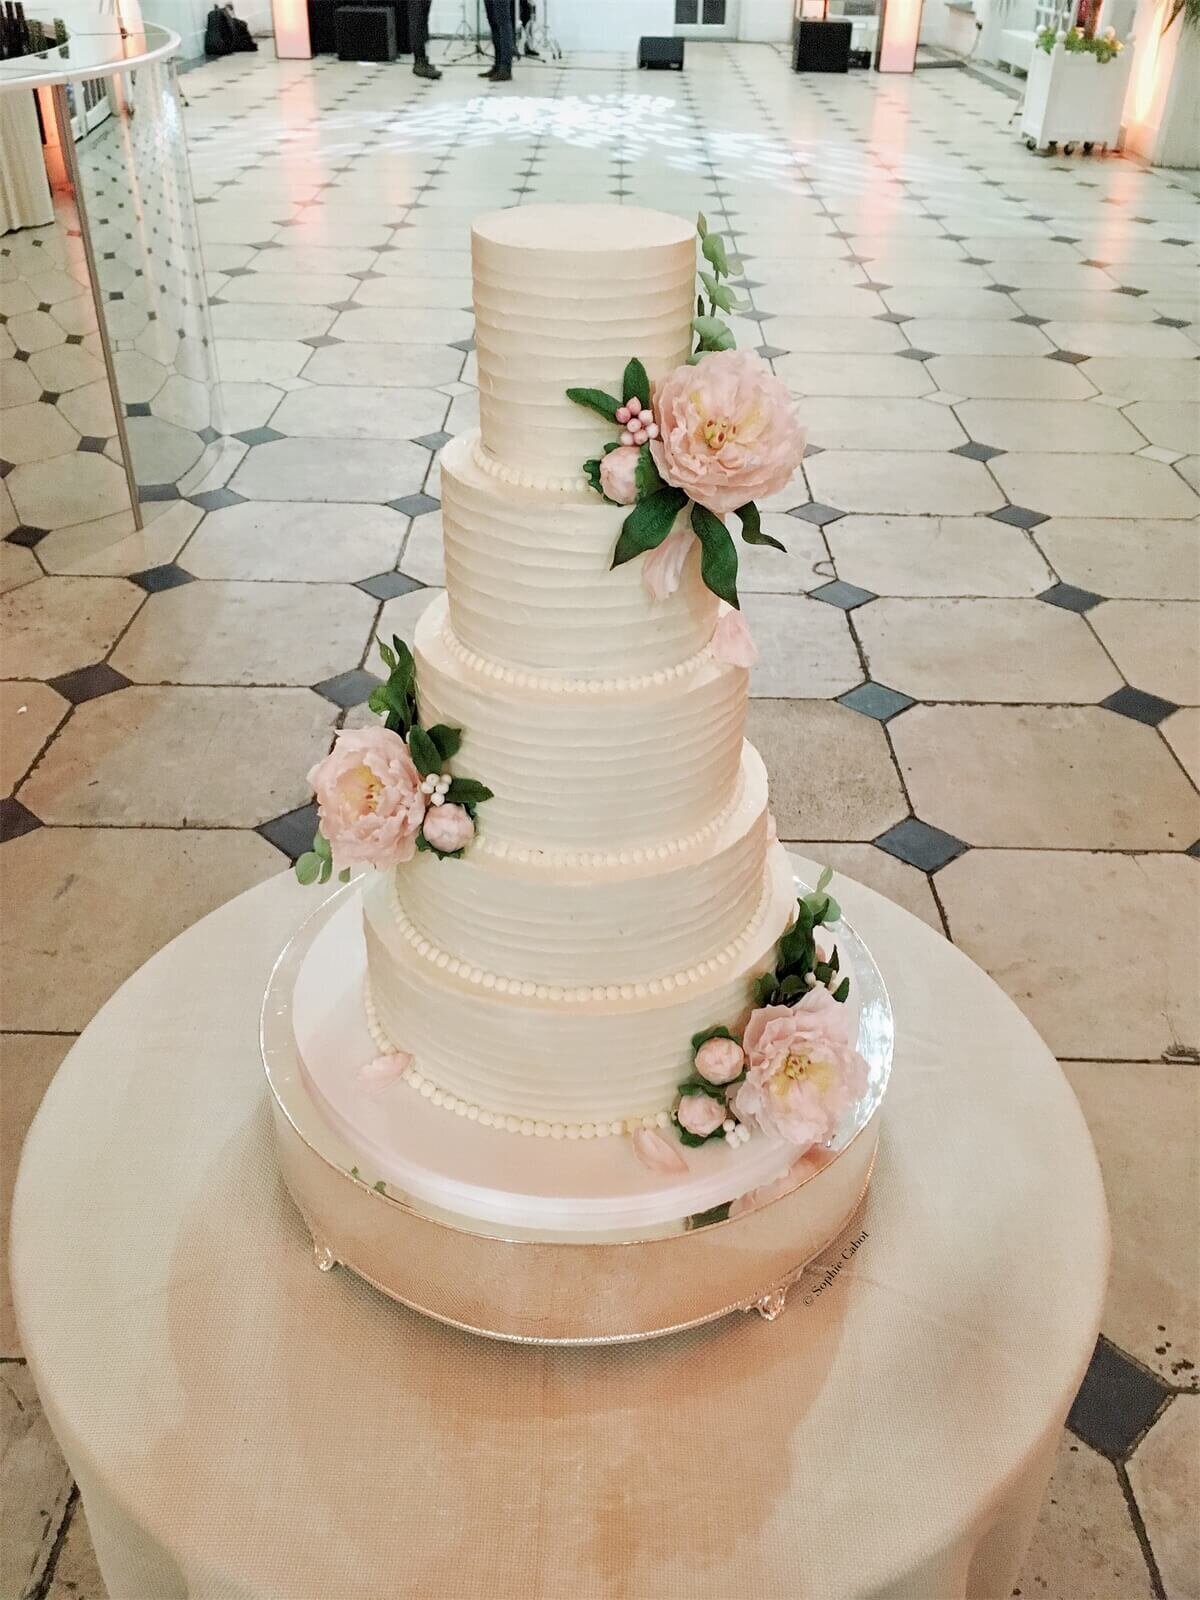 A white wedding cake with five tiers with a white ganache finish and sugar flowers clusters down the cake